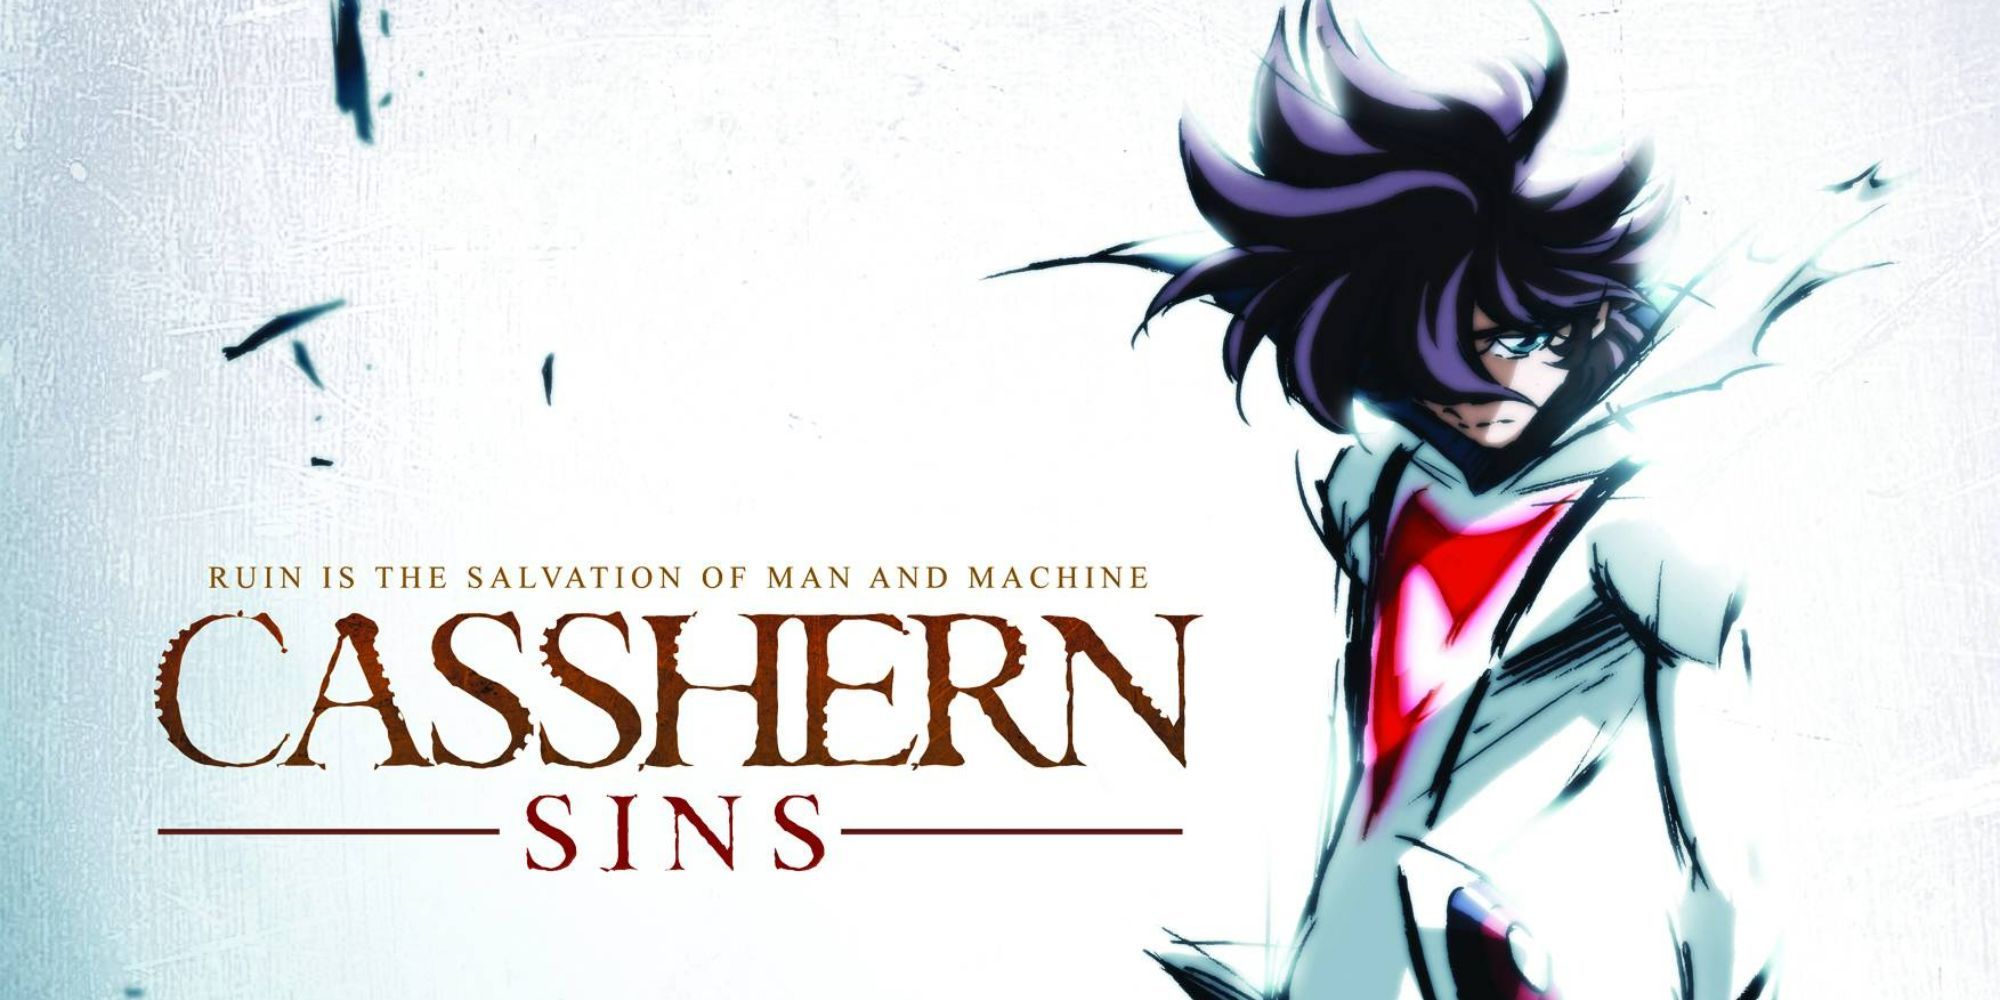 Character posing on the cover of Casshern Sins